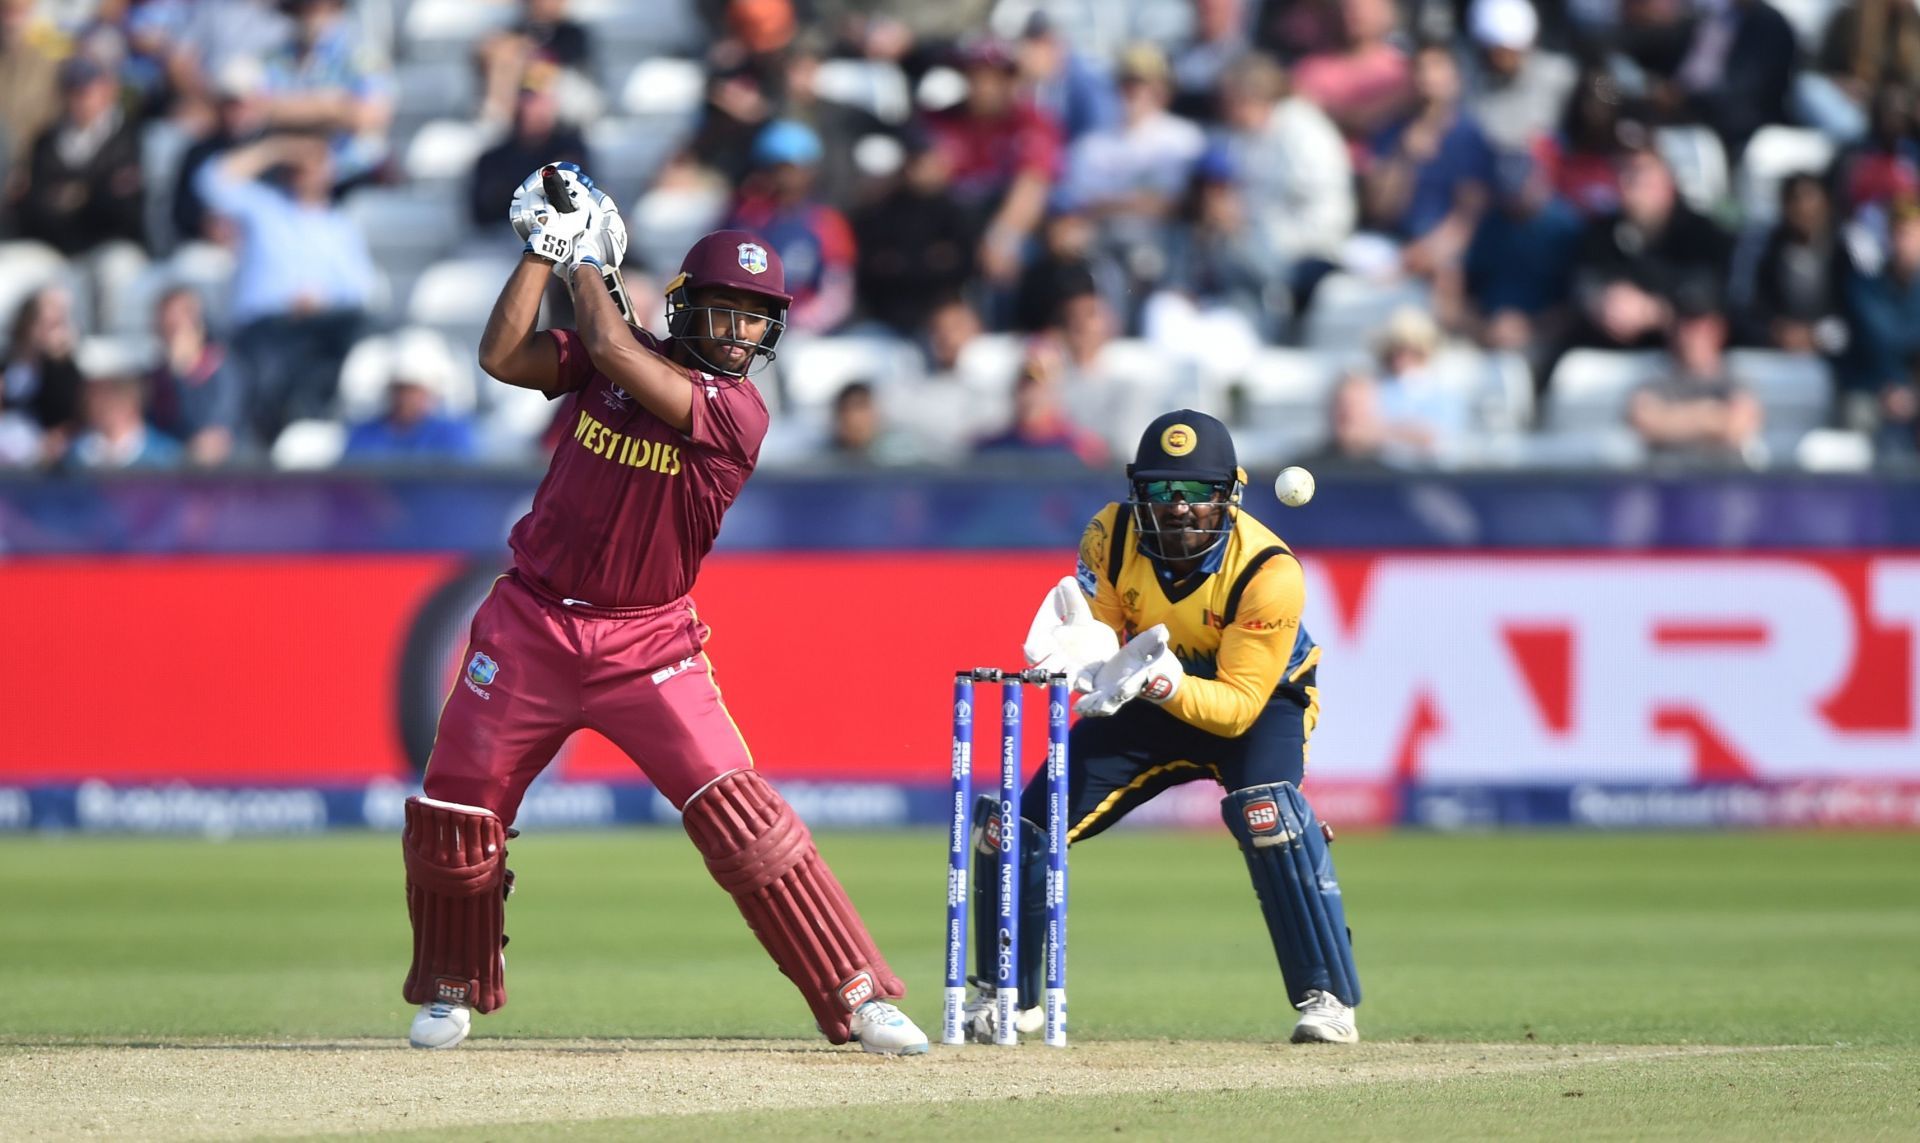 Nicholas Pooran will be the player to watch out for in the West Indies vs Sri Lanka T20 World Cup match